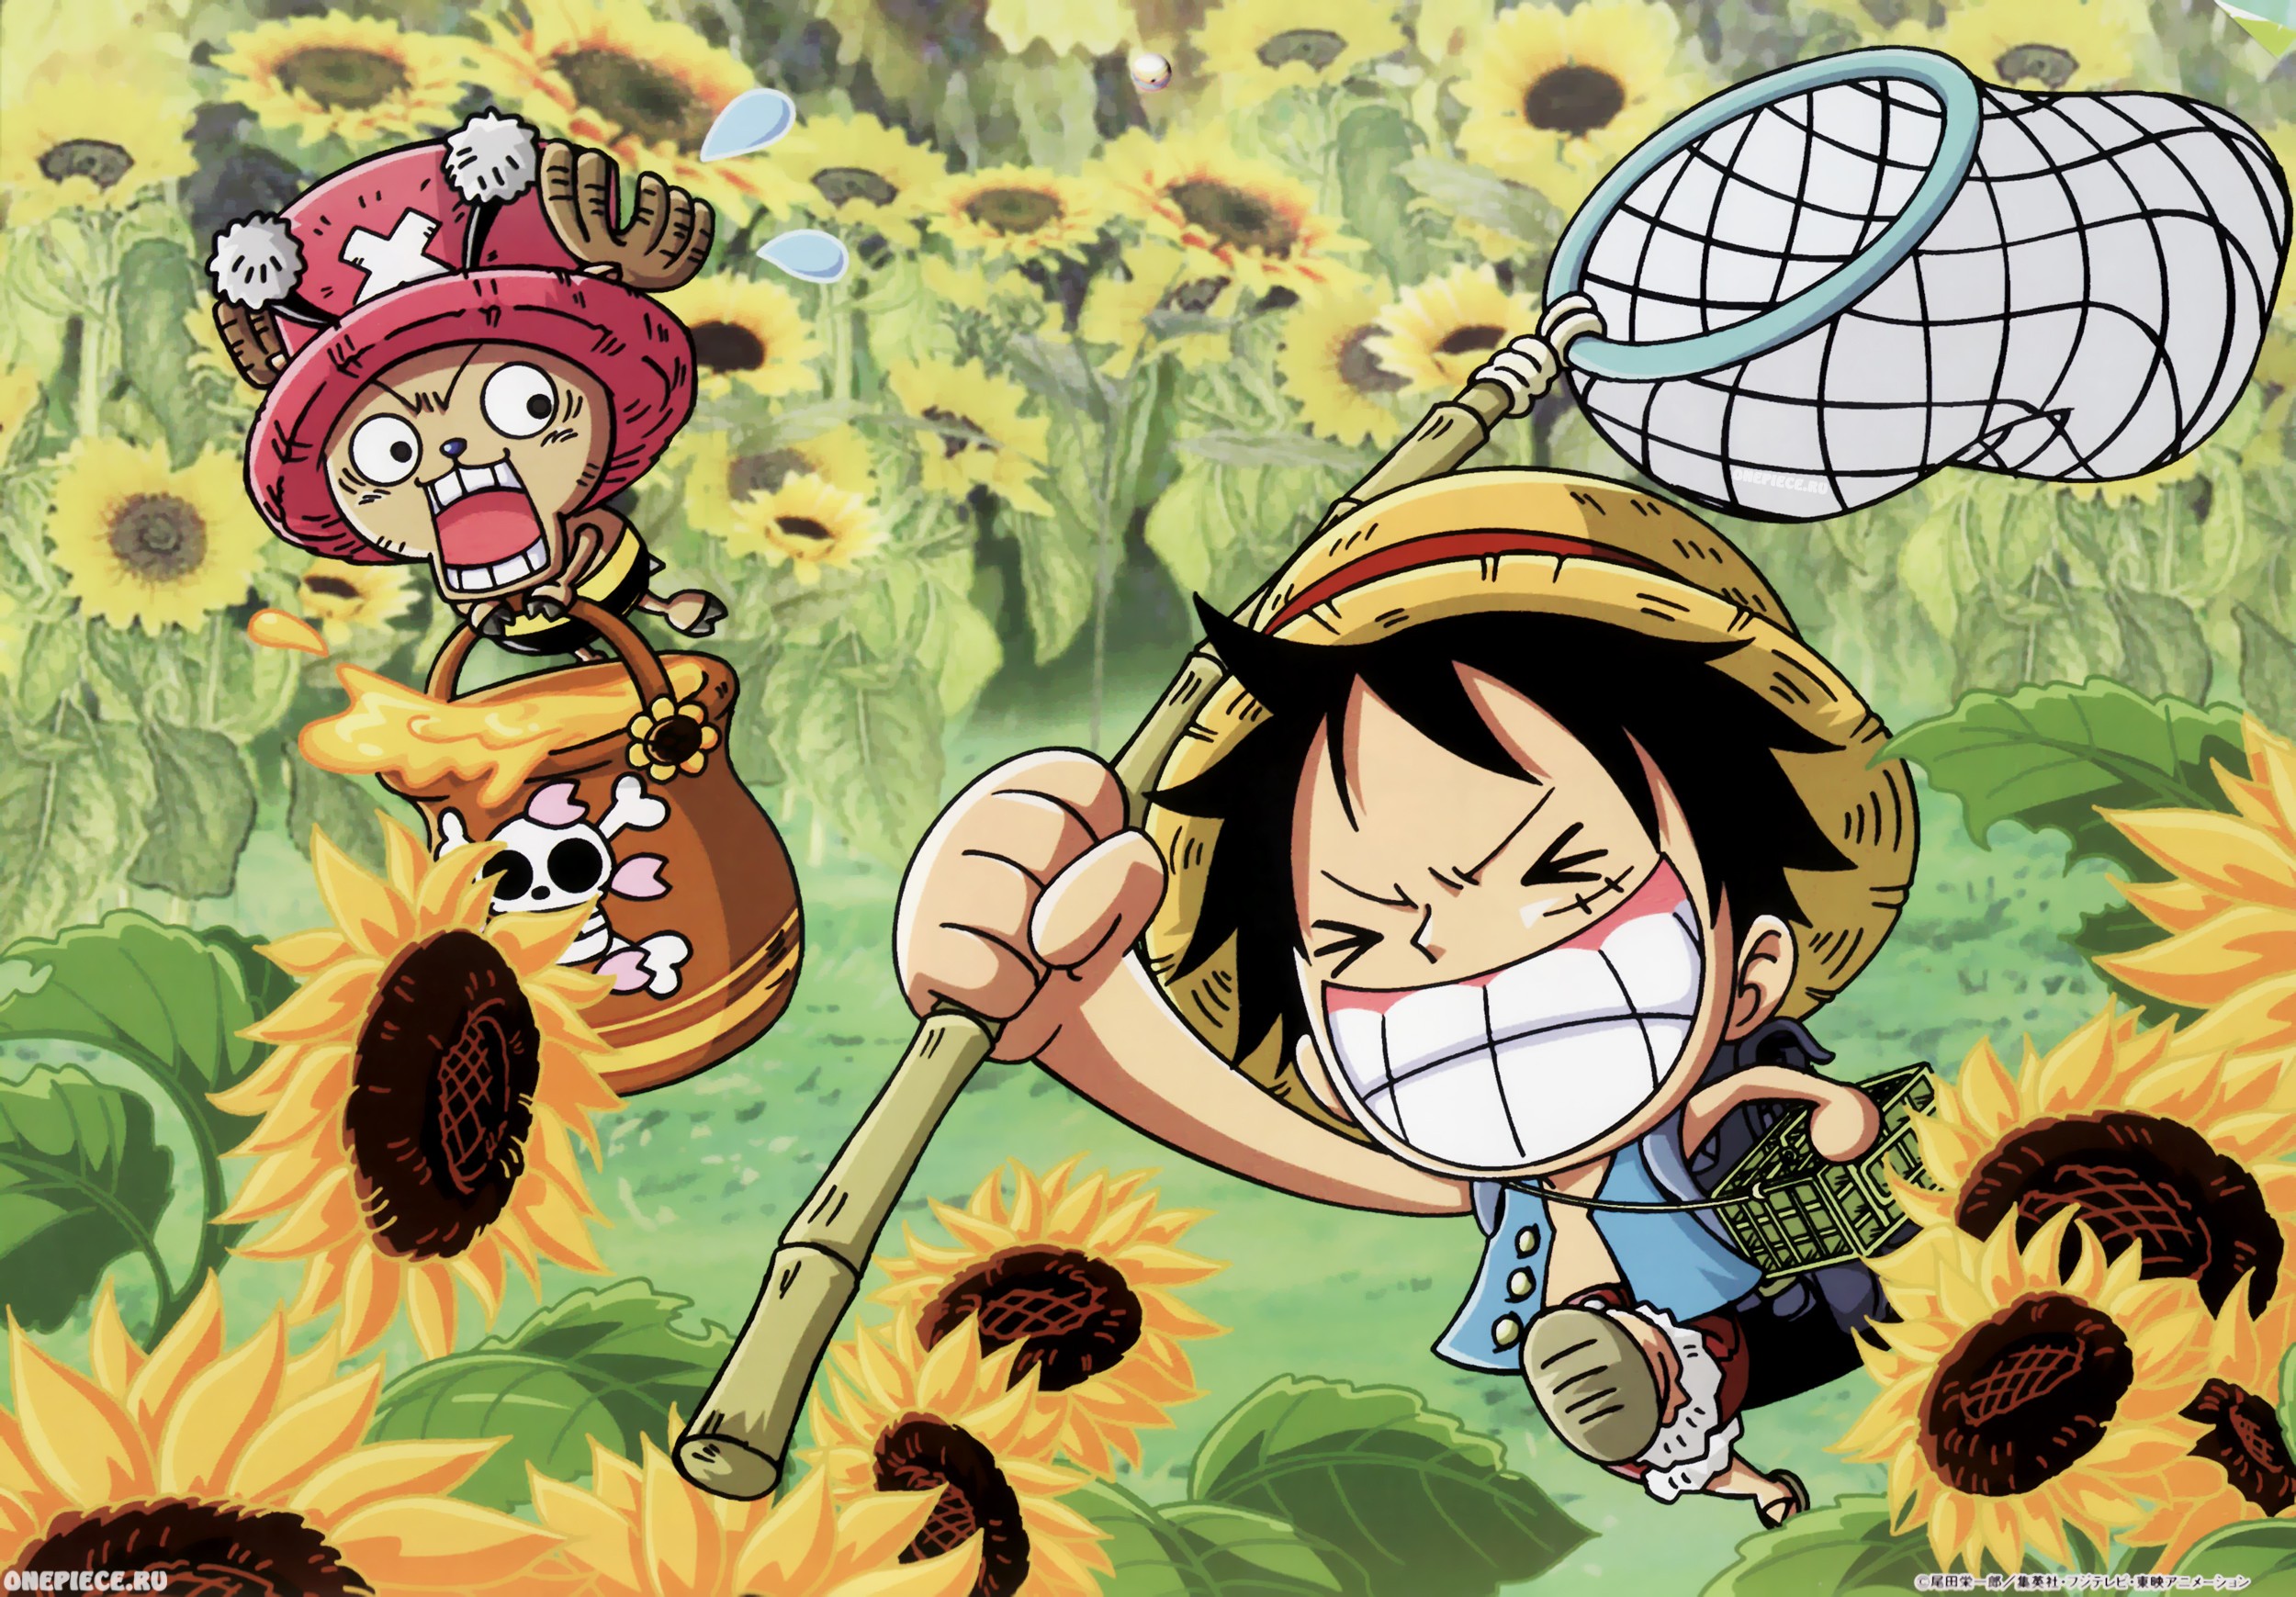 Download One Piece Chibi Luffy Wallpaper 2500x1739 22787 Full Size